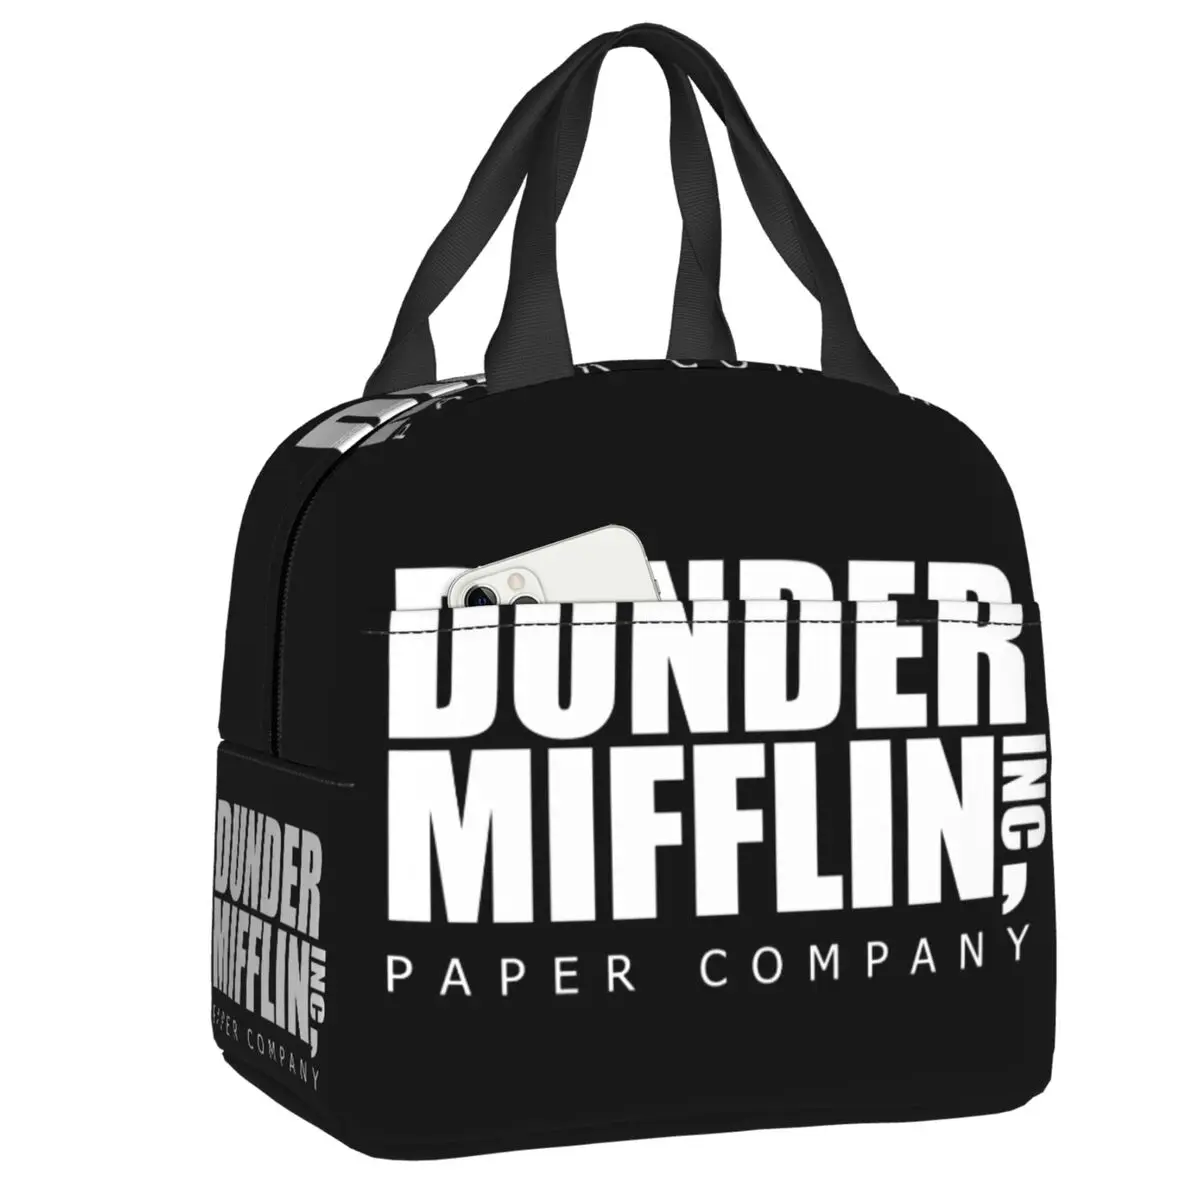 

The Office TV Show Dunder Mifflin Paper Company Insulated Lunch Bags for Women Portable Cooler Thermal Food Lunch Box School